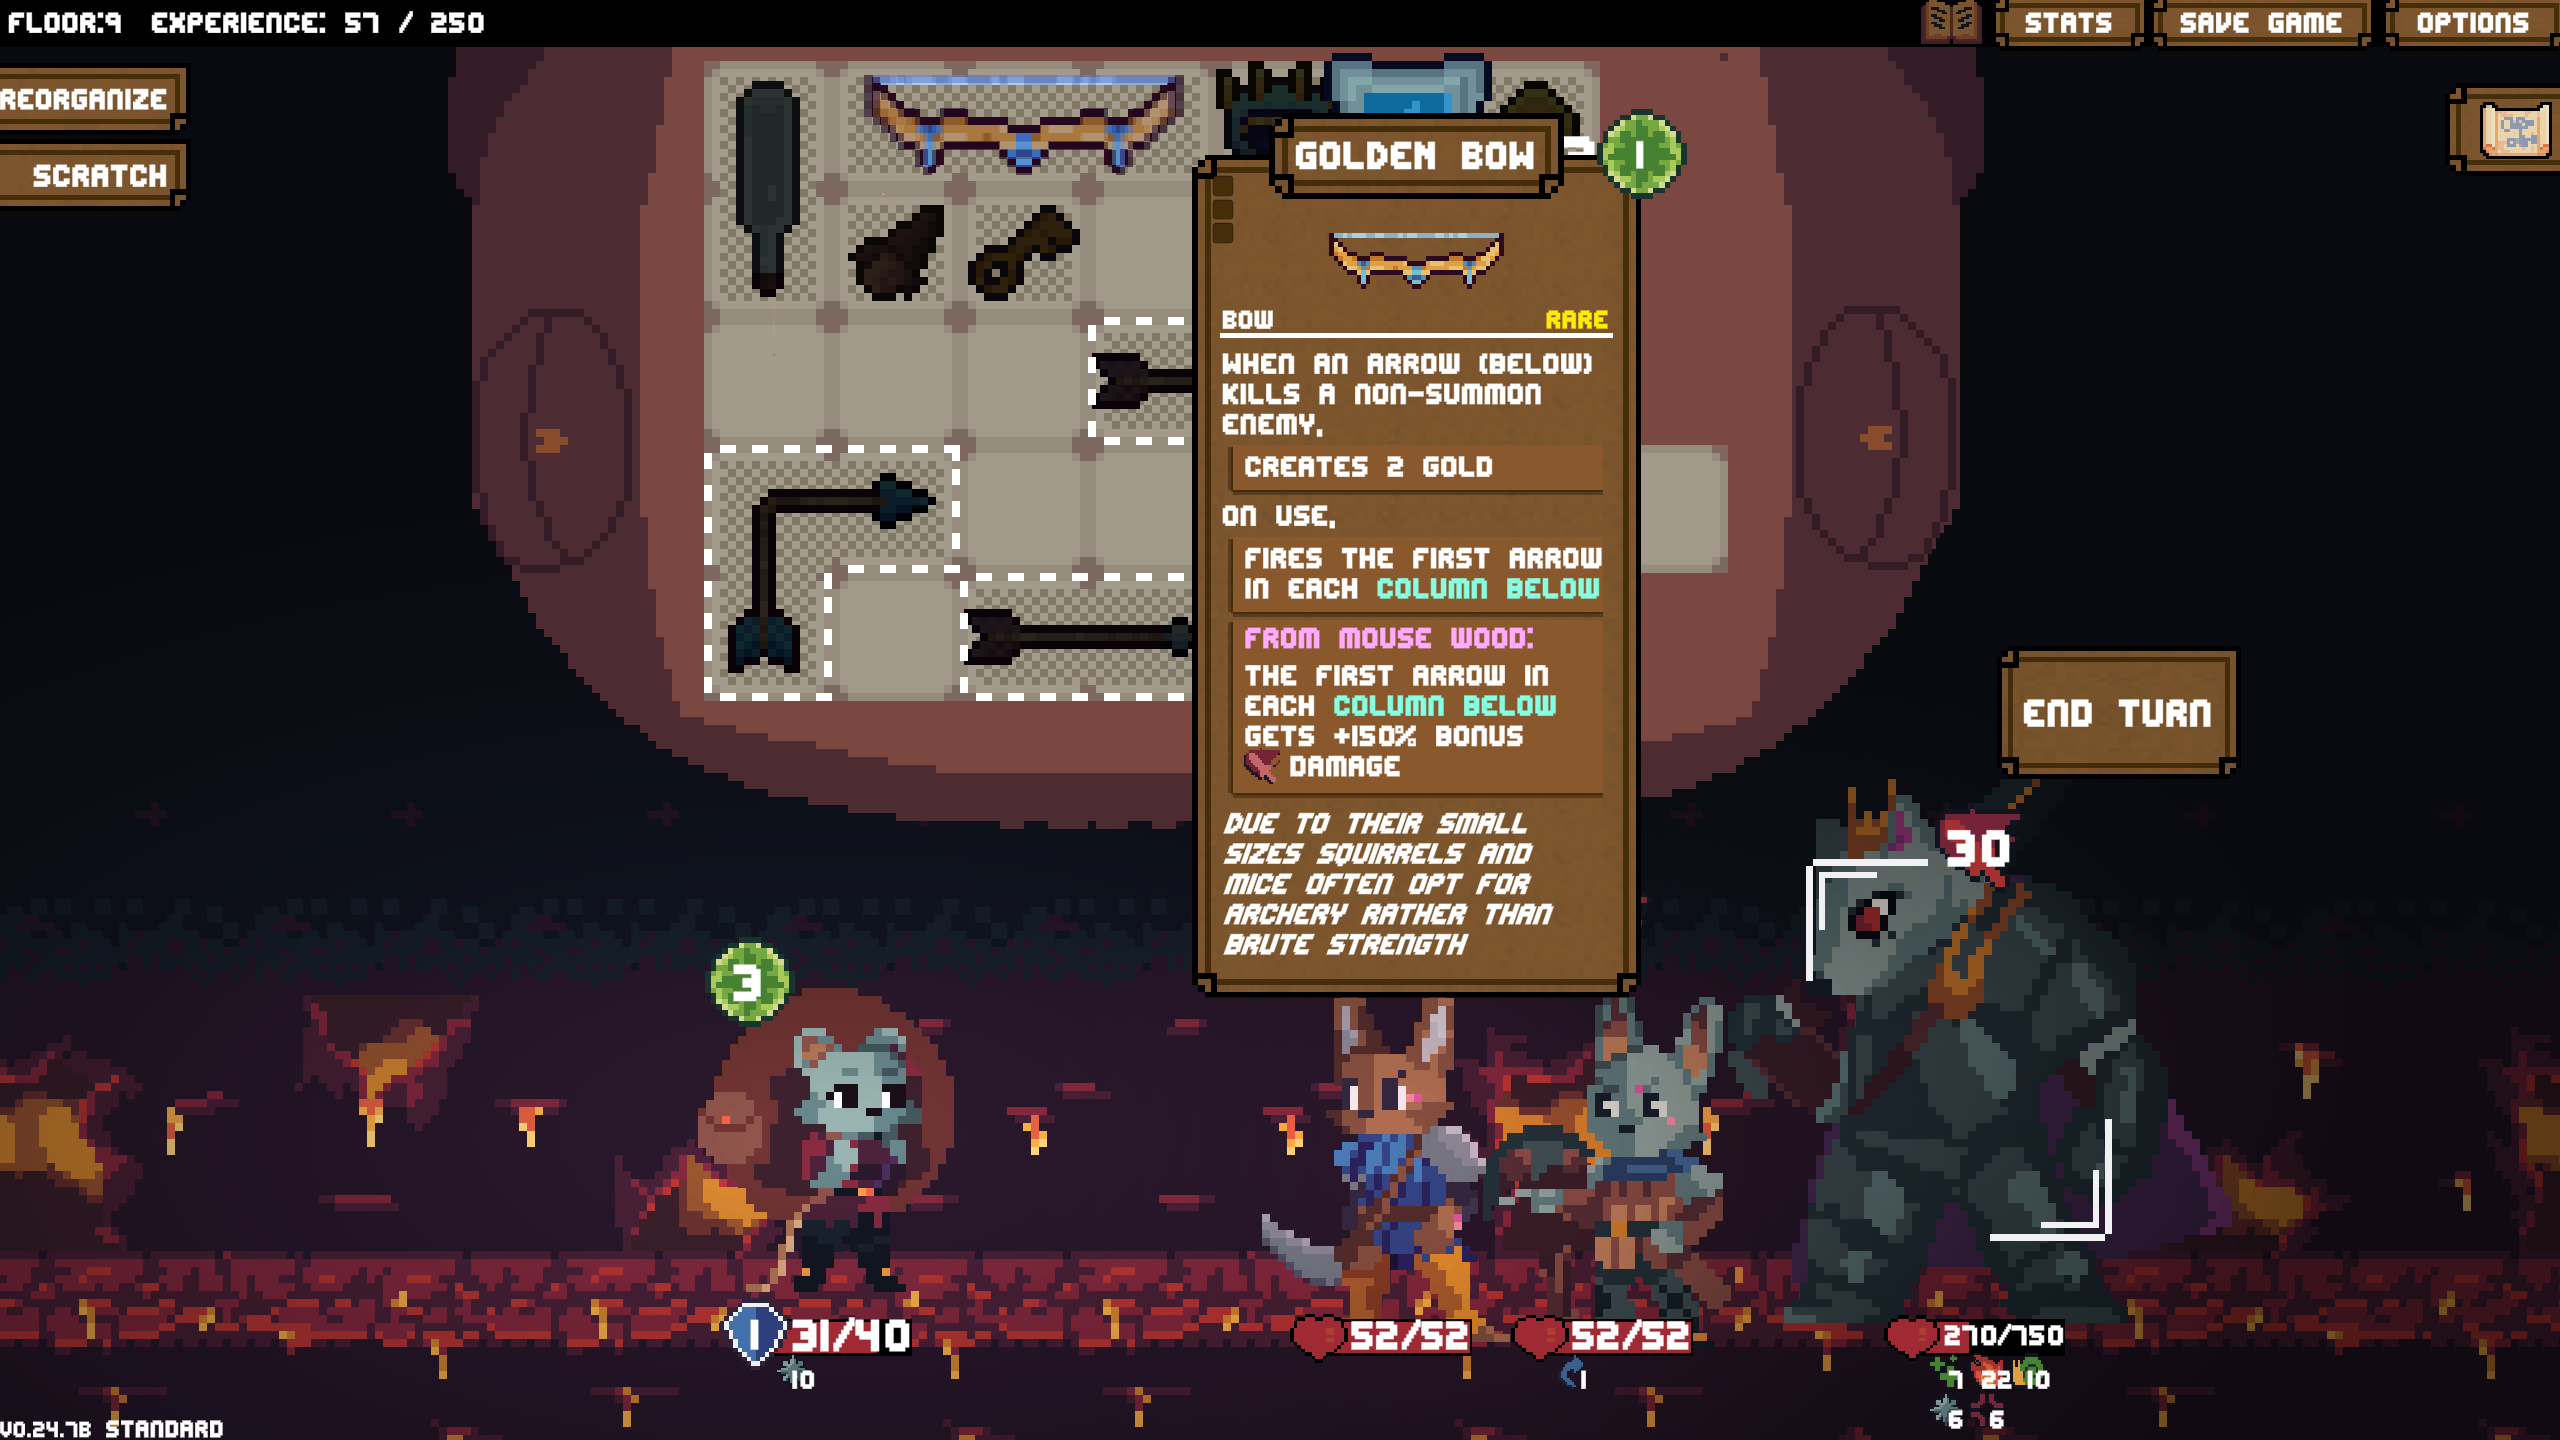 An archer mouse melts baddies in a Backpack Hero screenshot.